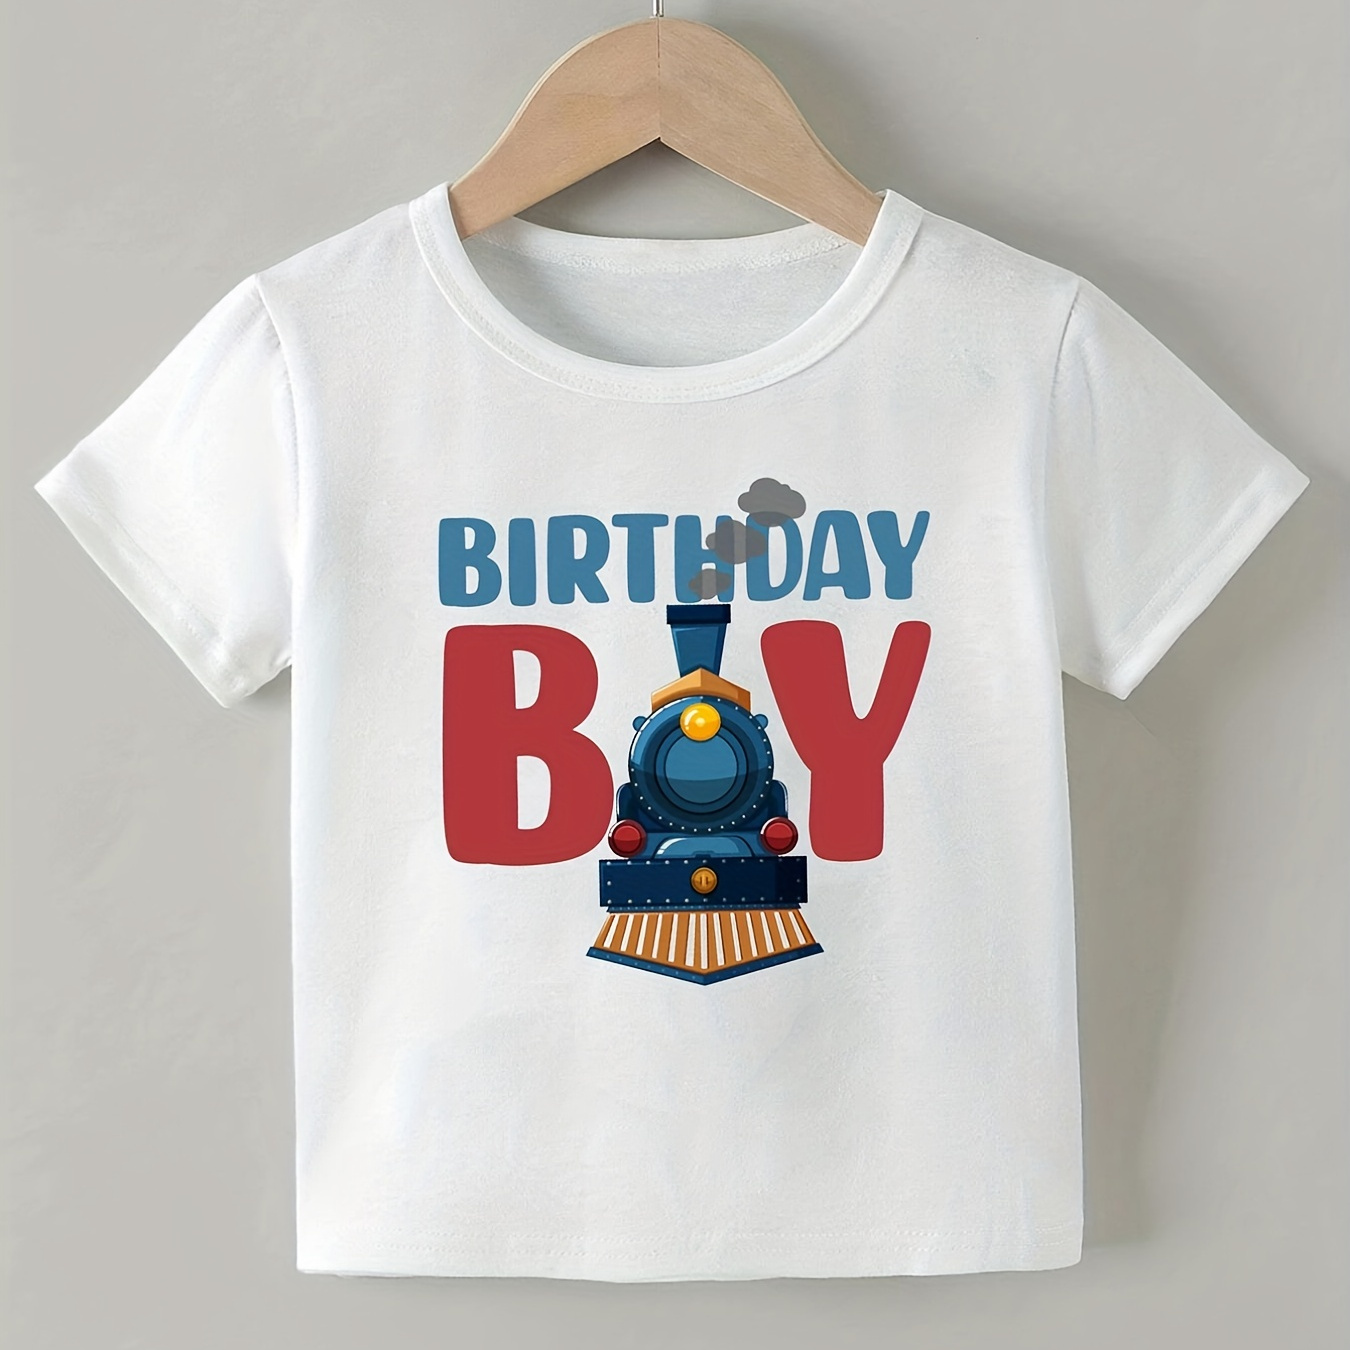 

Boys Train & "birthday Boy" Print T-shirt, Crew Neck Comfortable Tees Tops Clothings For Infant Toddlers Kids Children Summer